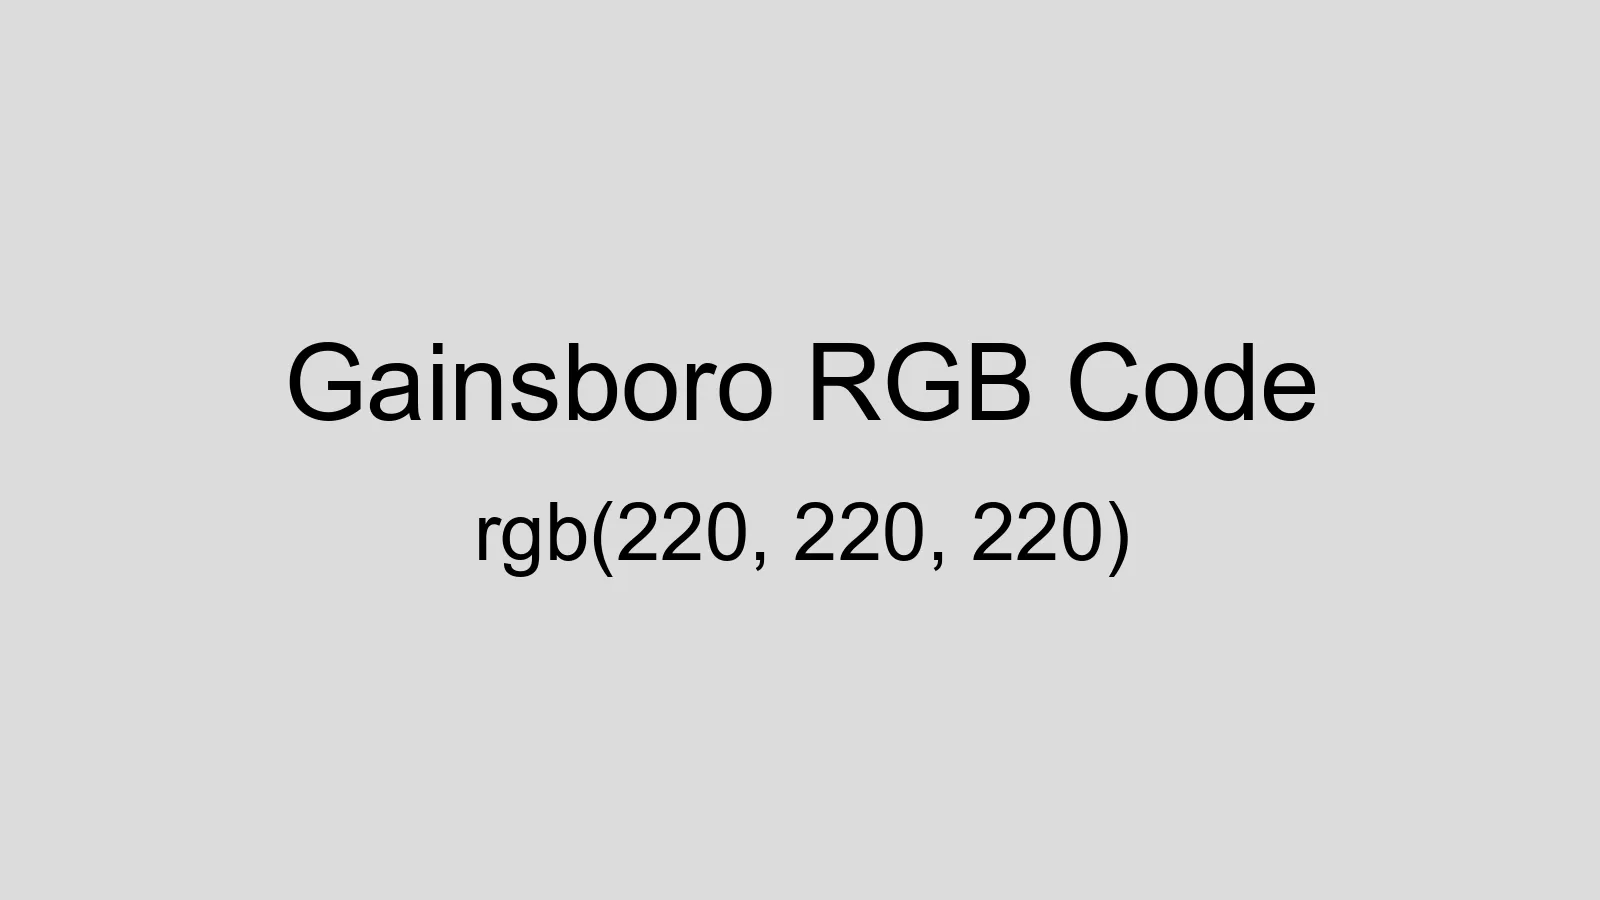 preview image of Gainsboro color and RGB code